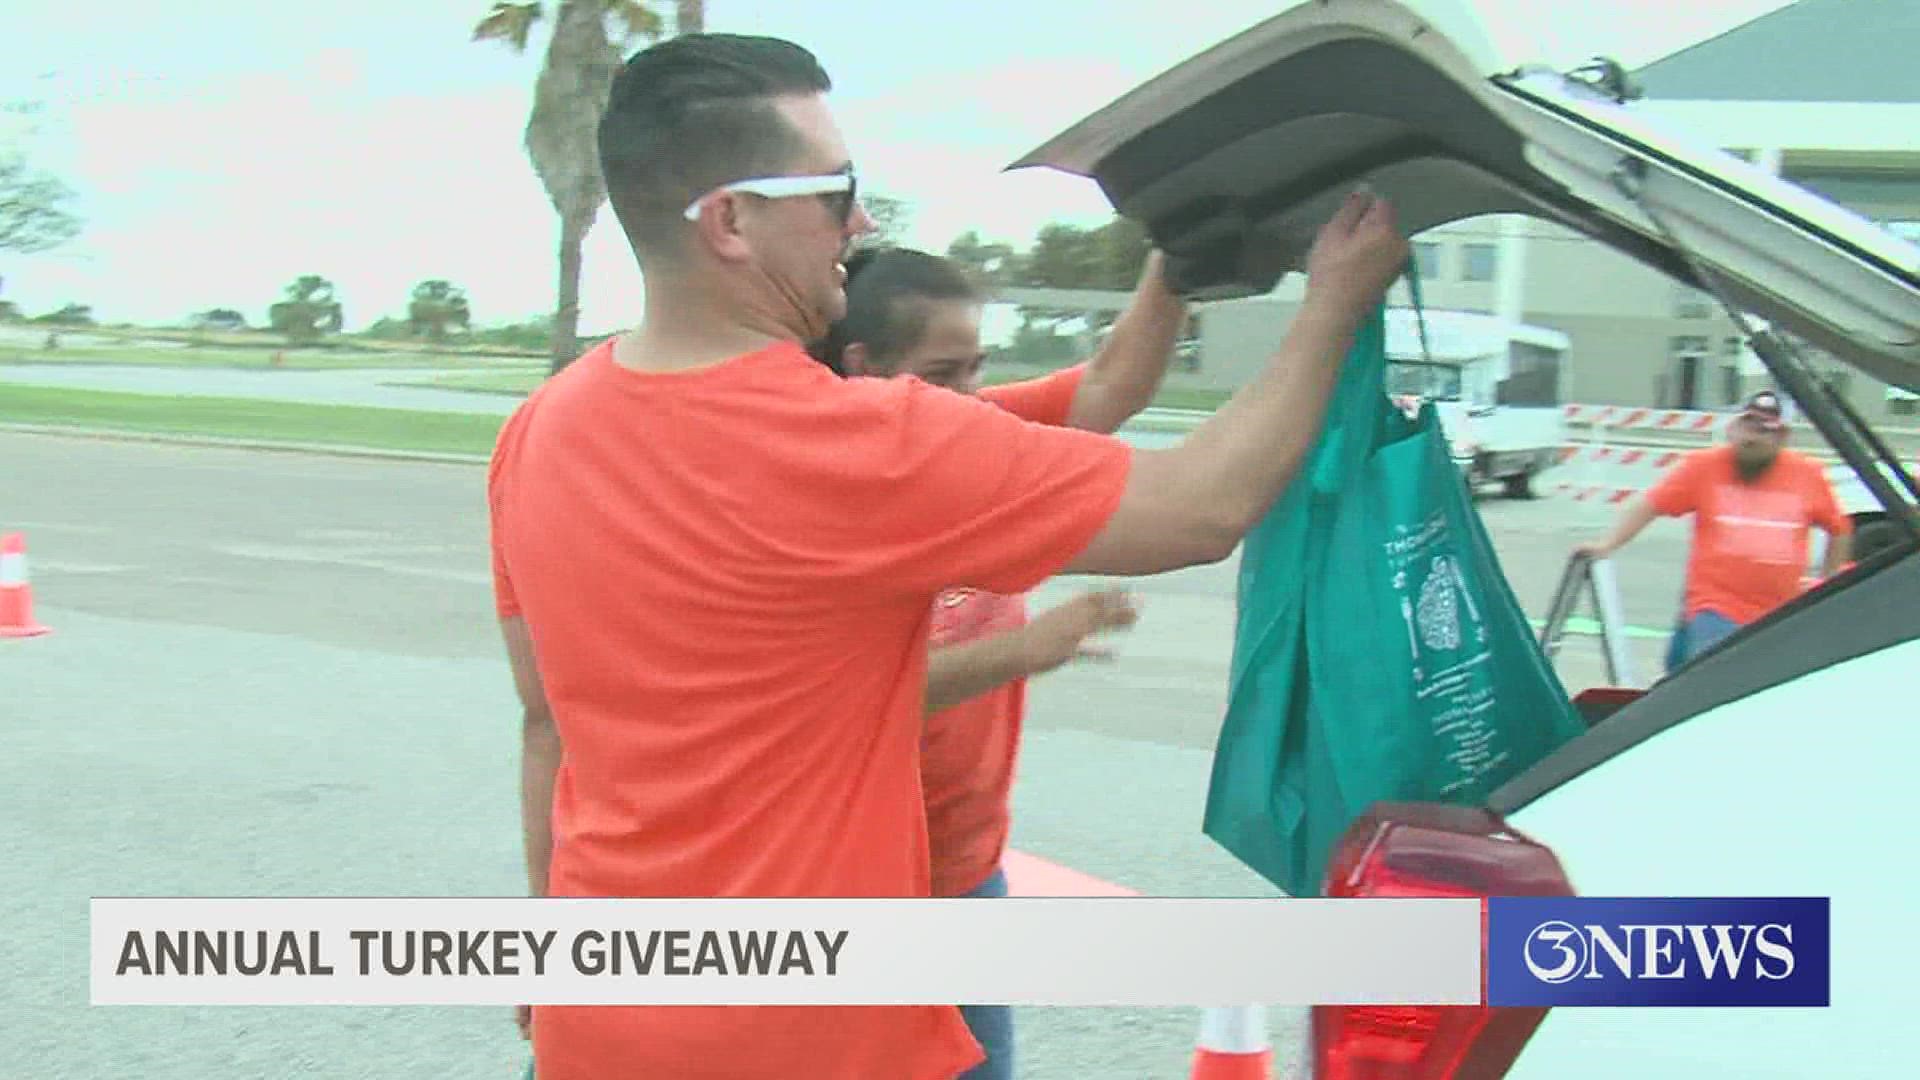 Thomas J. Henry holds annual Turkey Giveaway